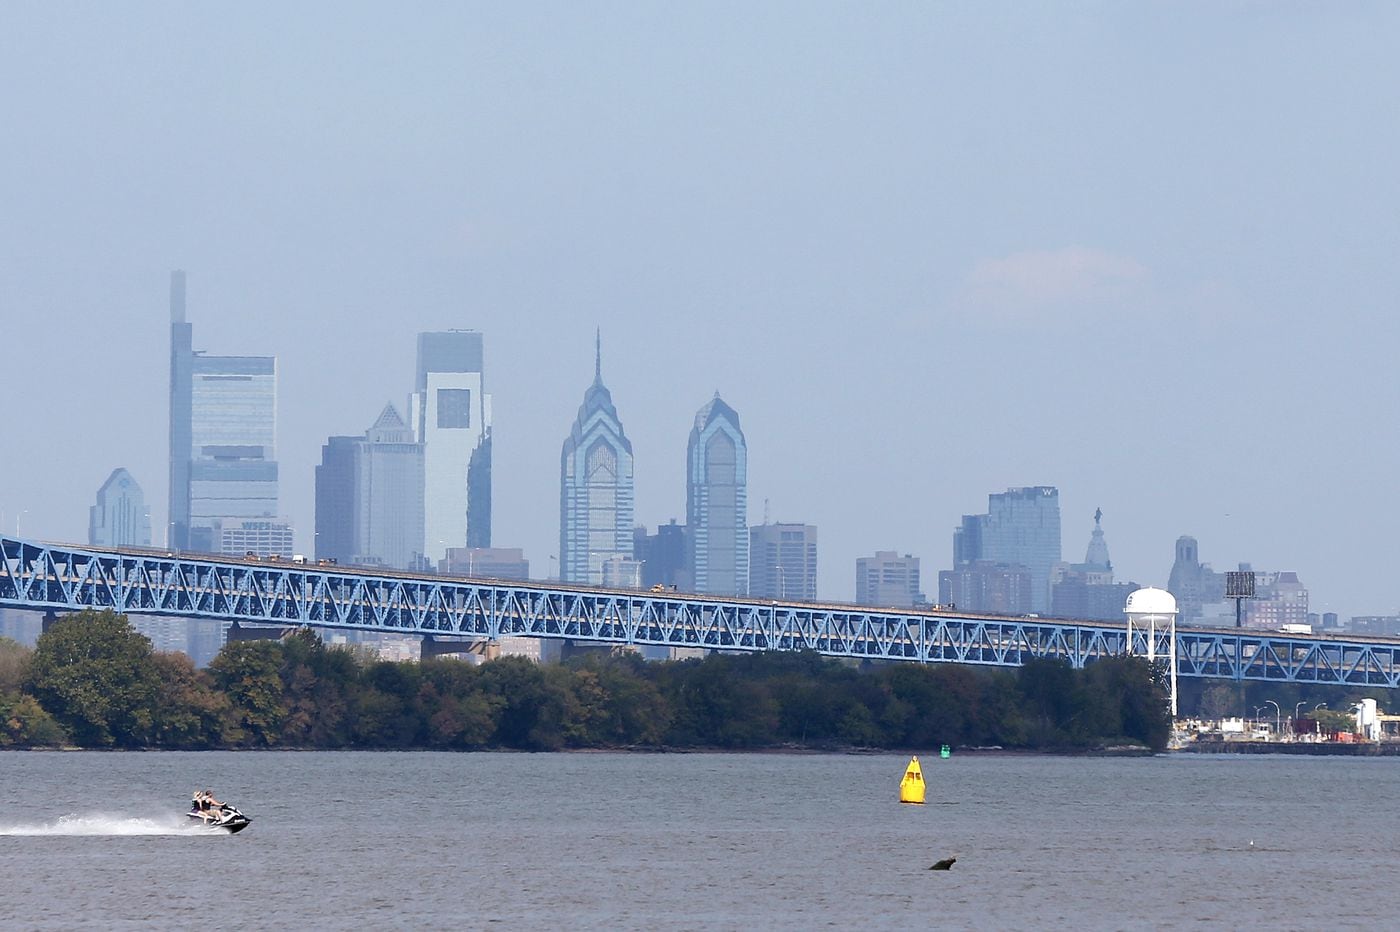 Philadelphia temperature tops 90 on an October day for first time in 78